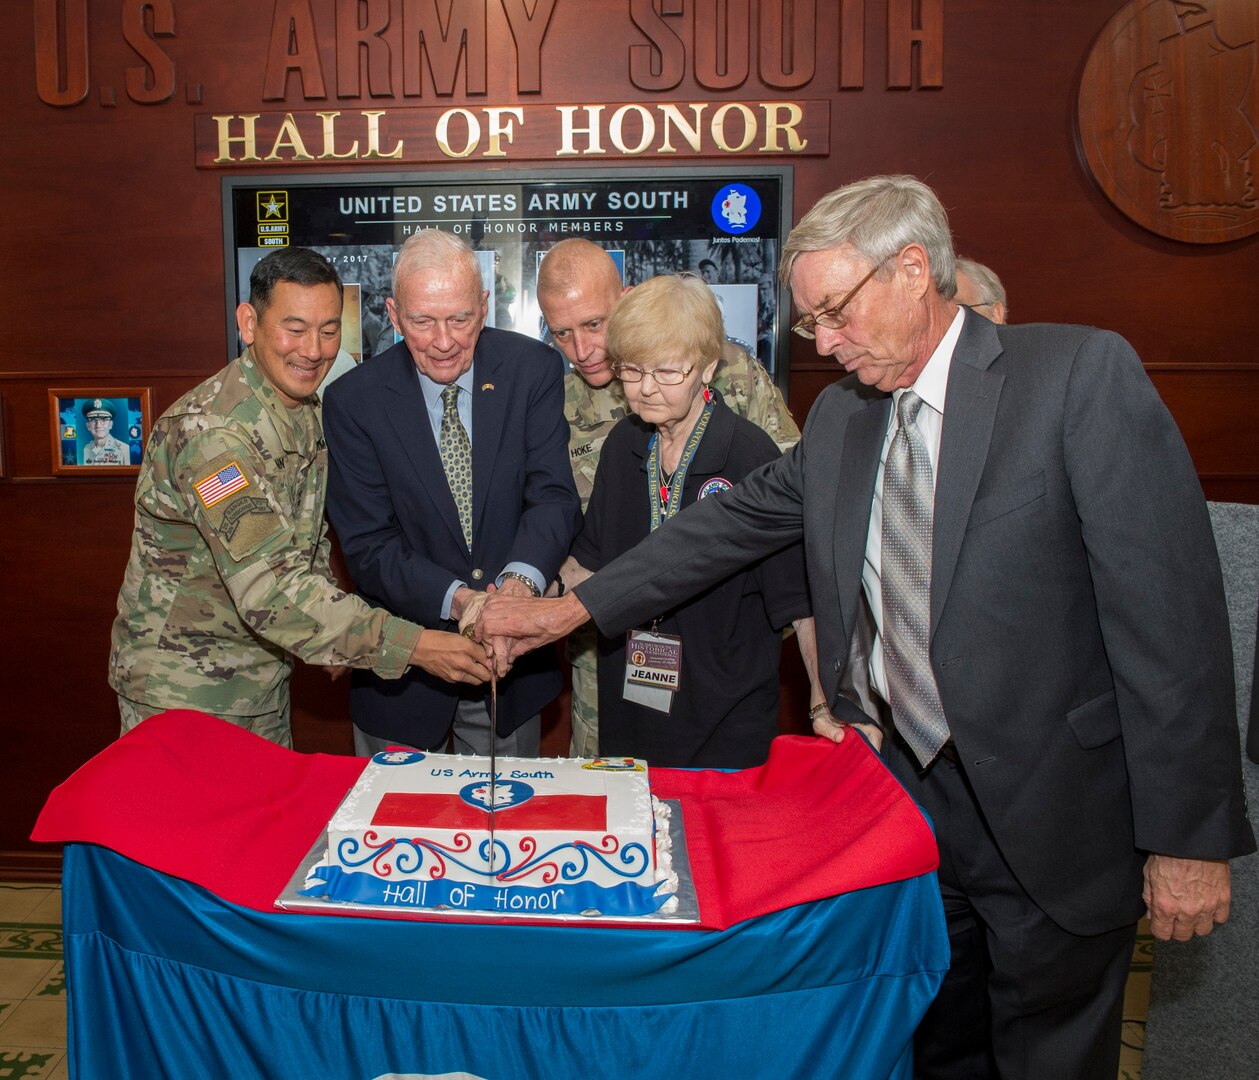 Maj. Gen. K.K. Chinn and the family members of two of the inductees Gen. Walter Kruger and Capt. Hal Kopp (Alamo Scouts) along with retired Col. Ralph Puckett cut the cake at the inaugural Hall of Honor ceremony Sept. 14 at Joint Base San Antonio-Fort Sam Houston.